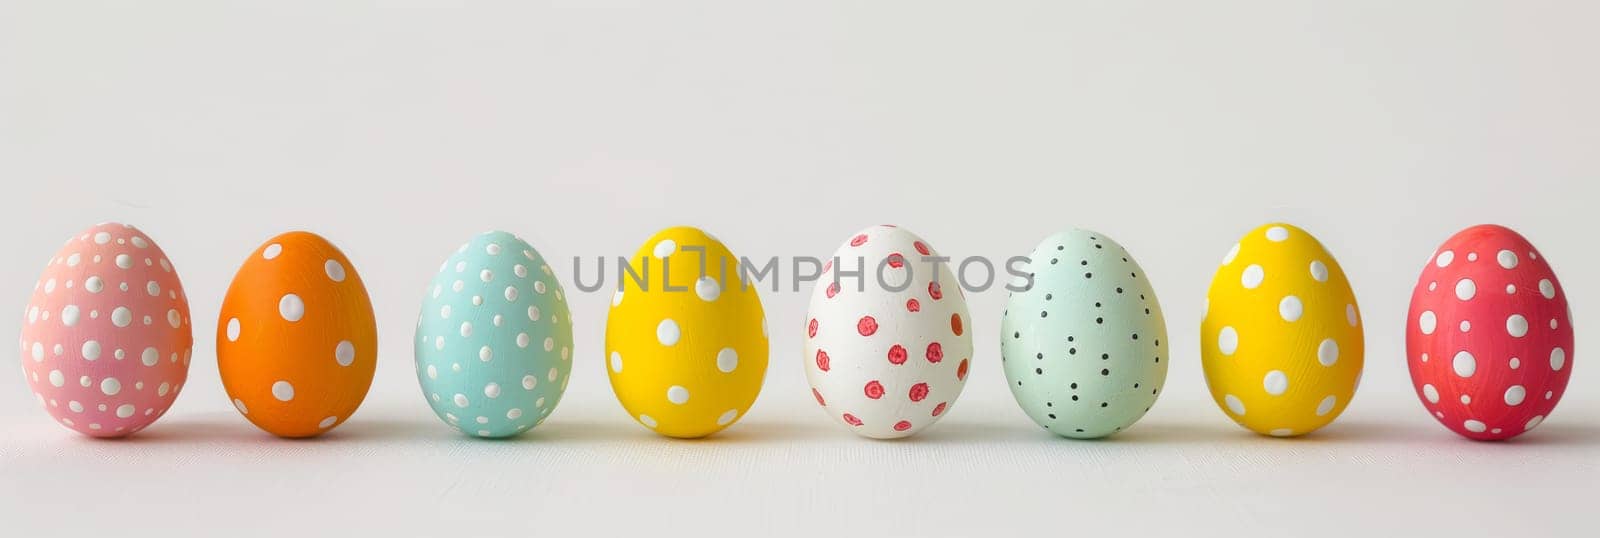 A row of painted eggs with polka dots and stripes by AI generated image.